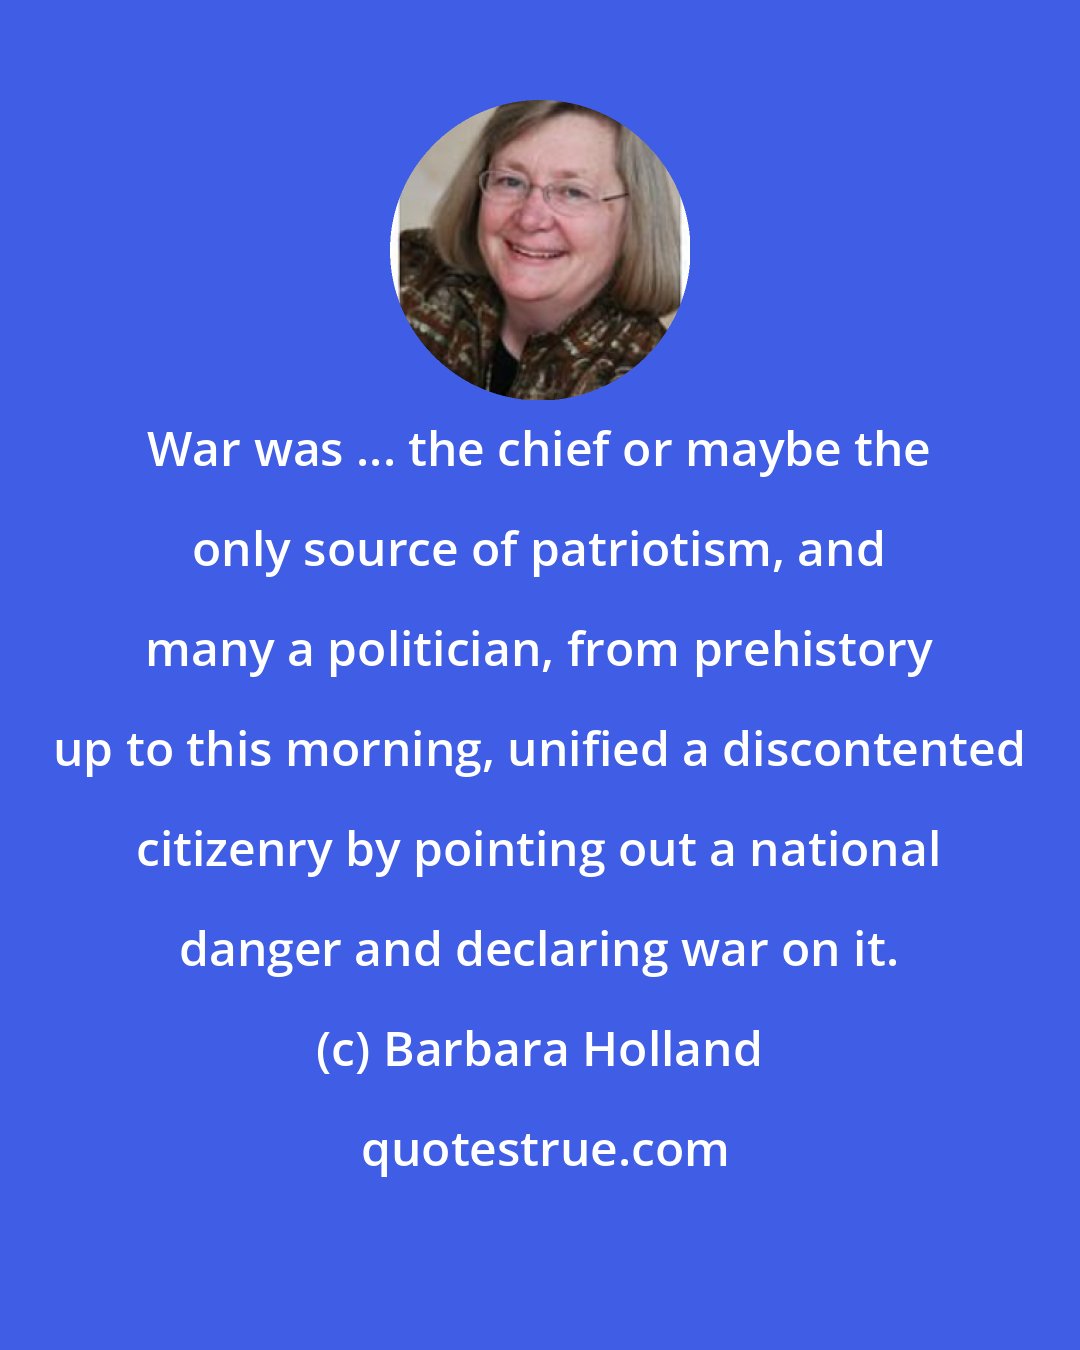 Barbara Holland: War was ... the chief or maybe the only source of patriotism, and many a politician, from prehistory up to this morning, unified a discontented citizenry by pointing out a national danger and declaring war on it.